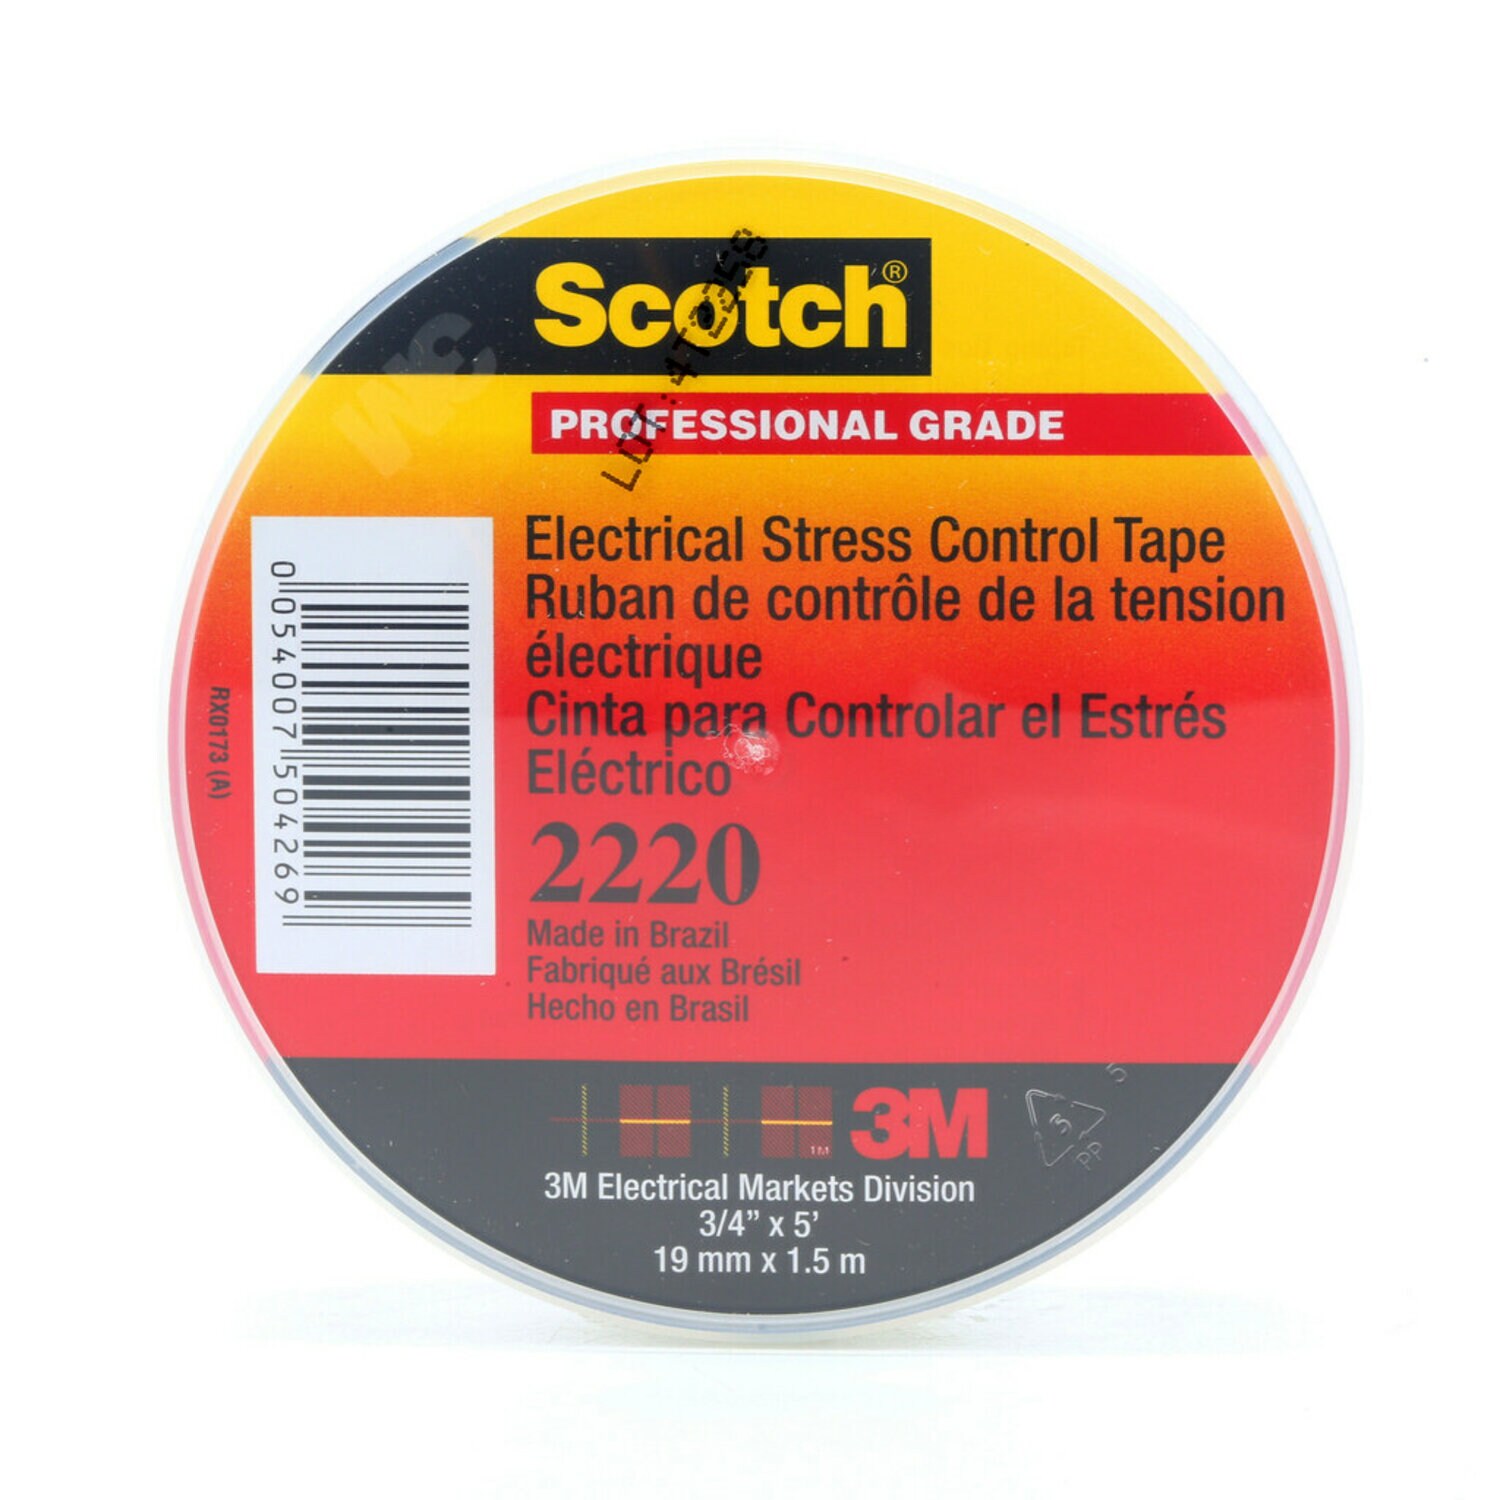 7000089981 - Scotch Electrical Stress Control Tape 2220, 3/4 in x 5 ft, Gray, 100
rolls/Case